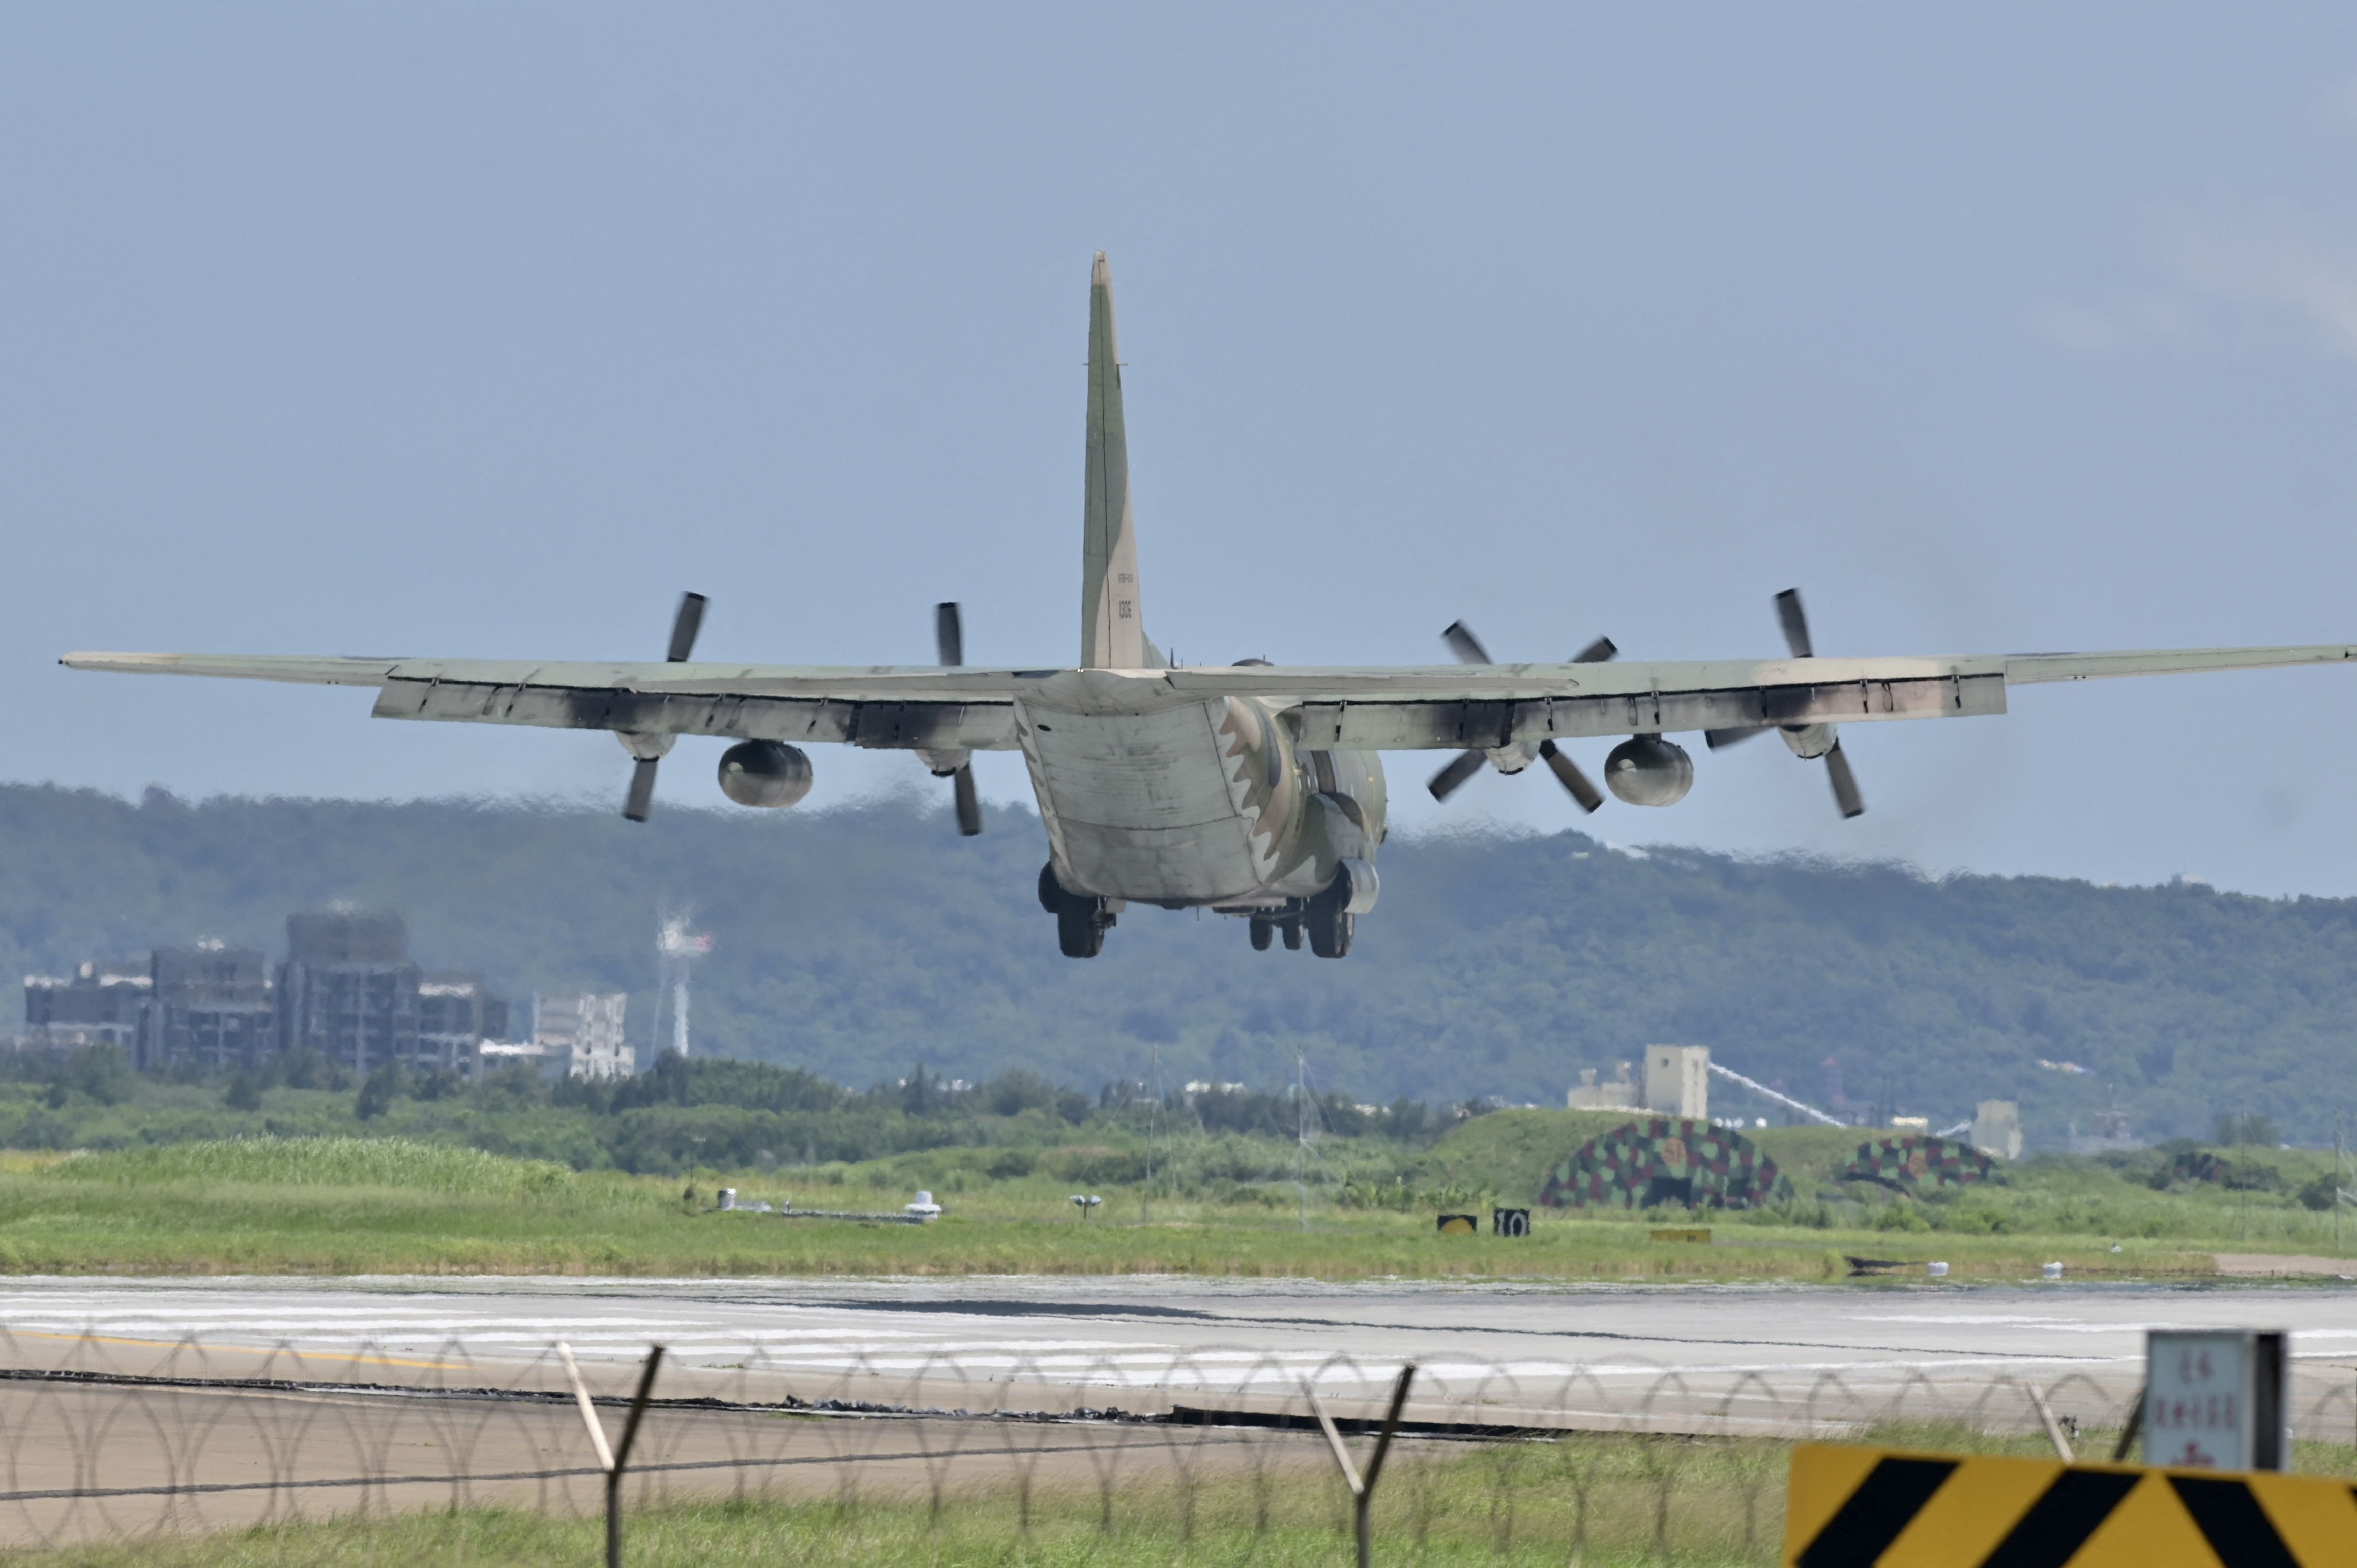 A US-made C-130 aircraft prepares to land on a runway at the Hsinchu Air Base in Hsinchu on August 5.